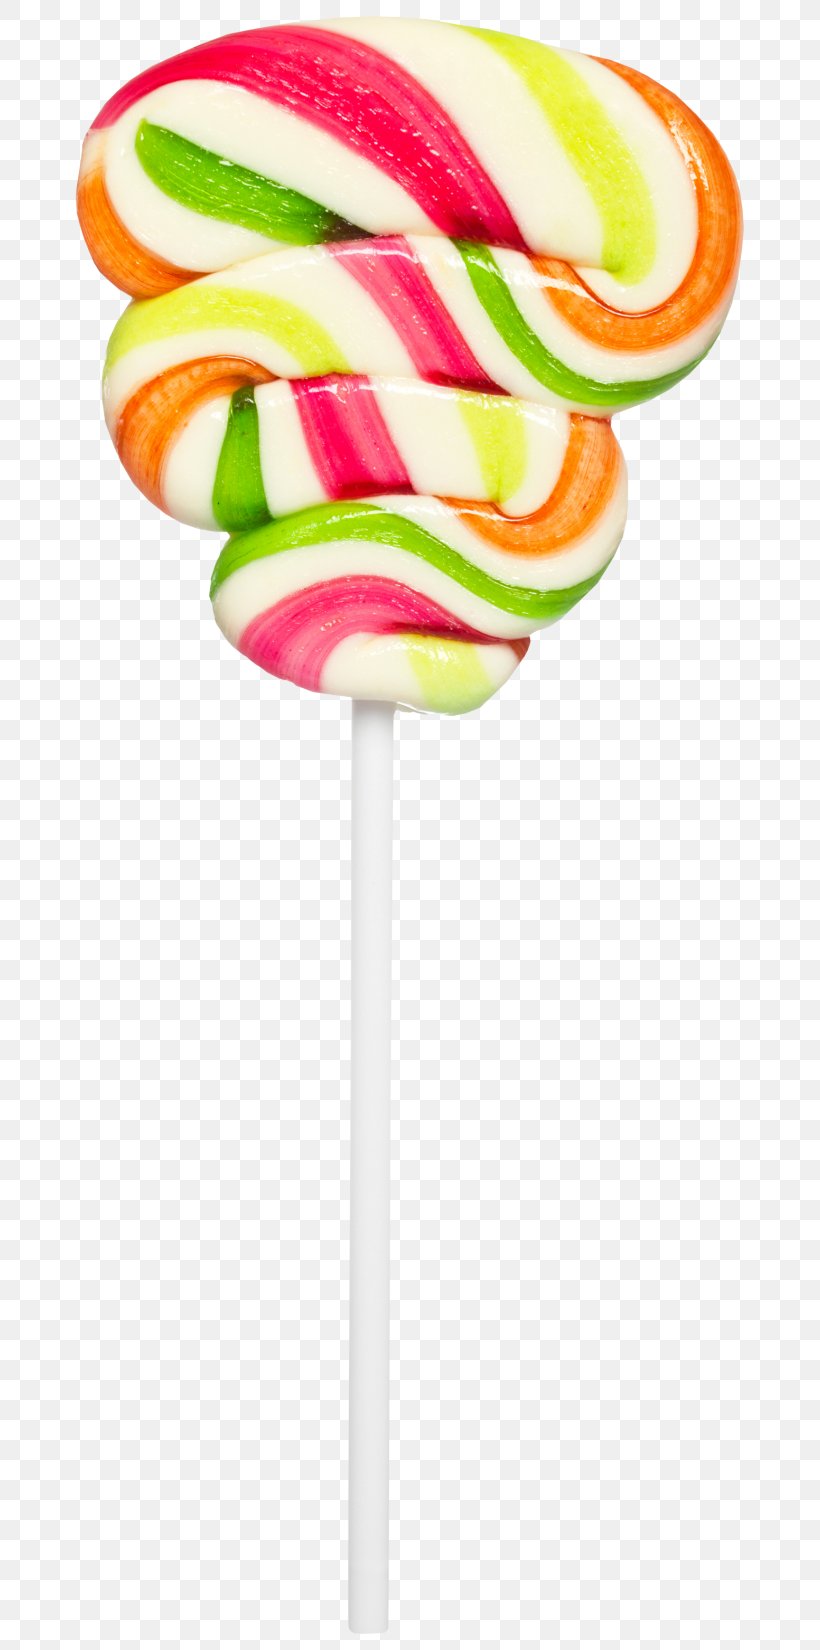 Lollipop Photography Can Stock Photo, PNG, 700x1650px, Lollipop, Bank, Can Stock Photo, Candy, Confectionery Download Free